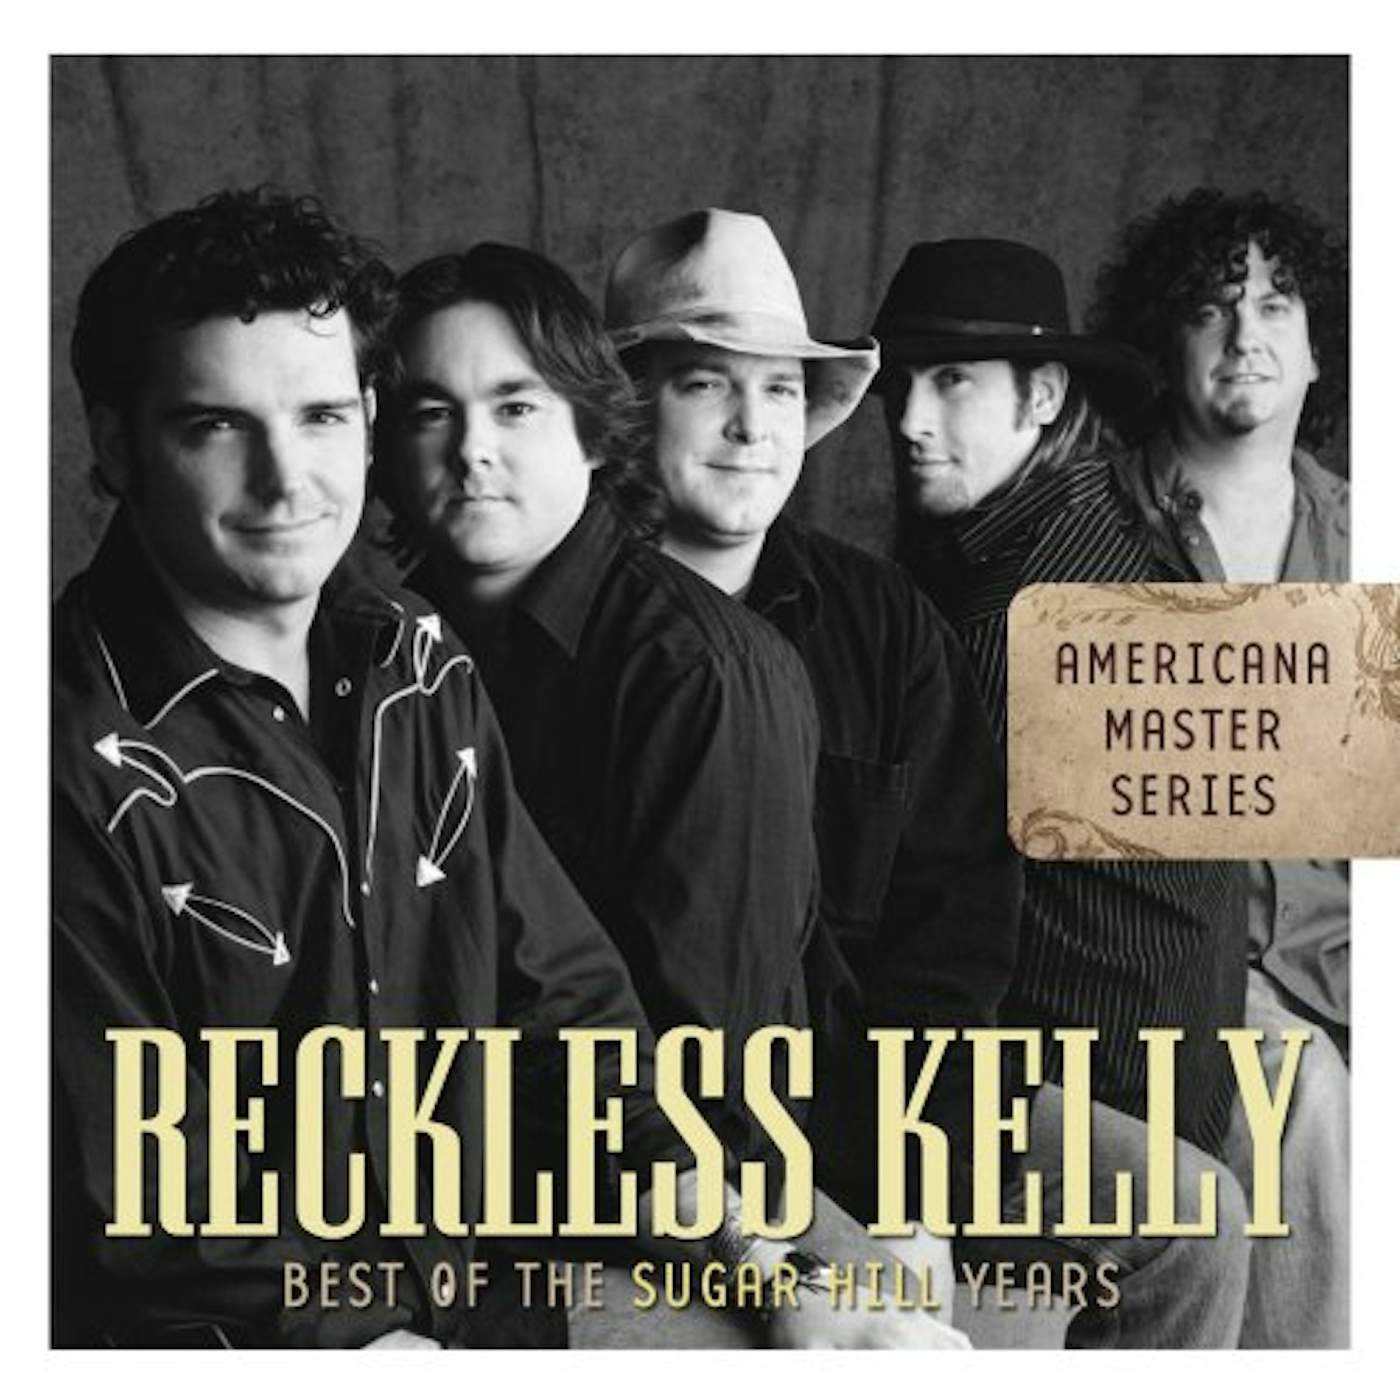 Reckless Kelly BEST OF THE SUGAR HILL YEARS CD